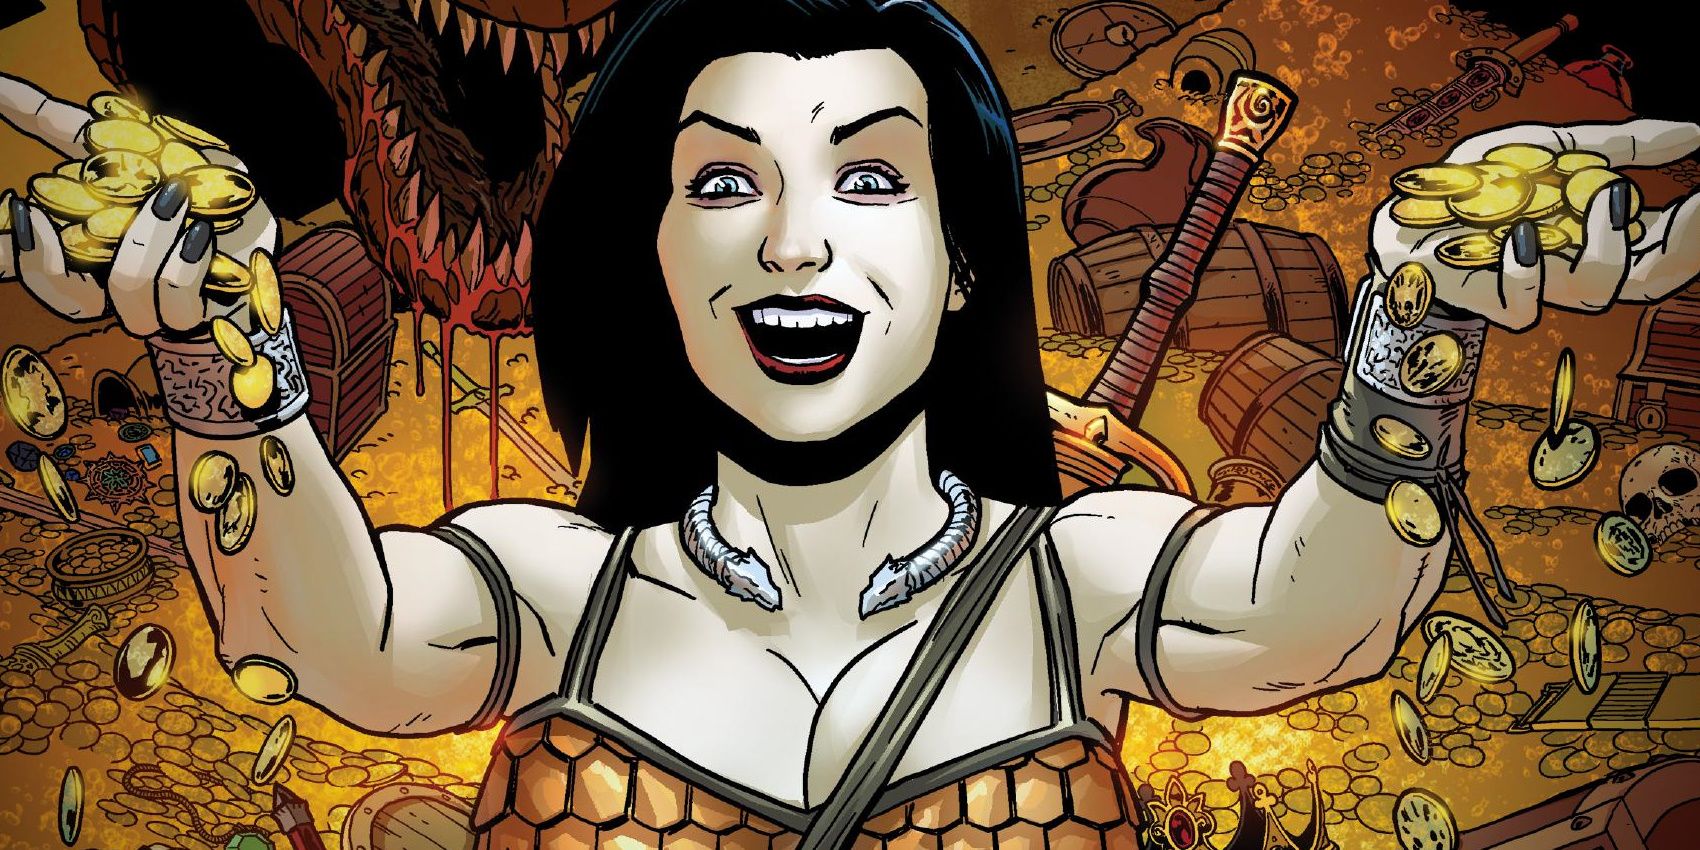 Garth Ennis' new series BABS, a sword & sorcery satire; protagonist surrounded by treasure